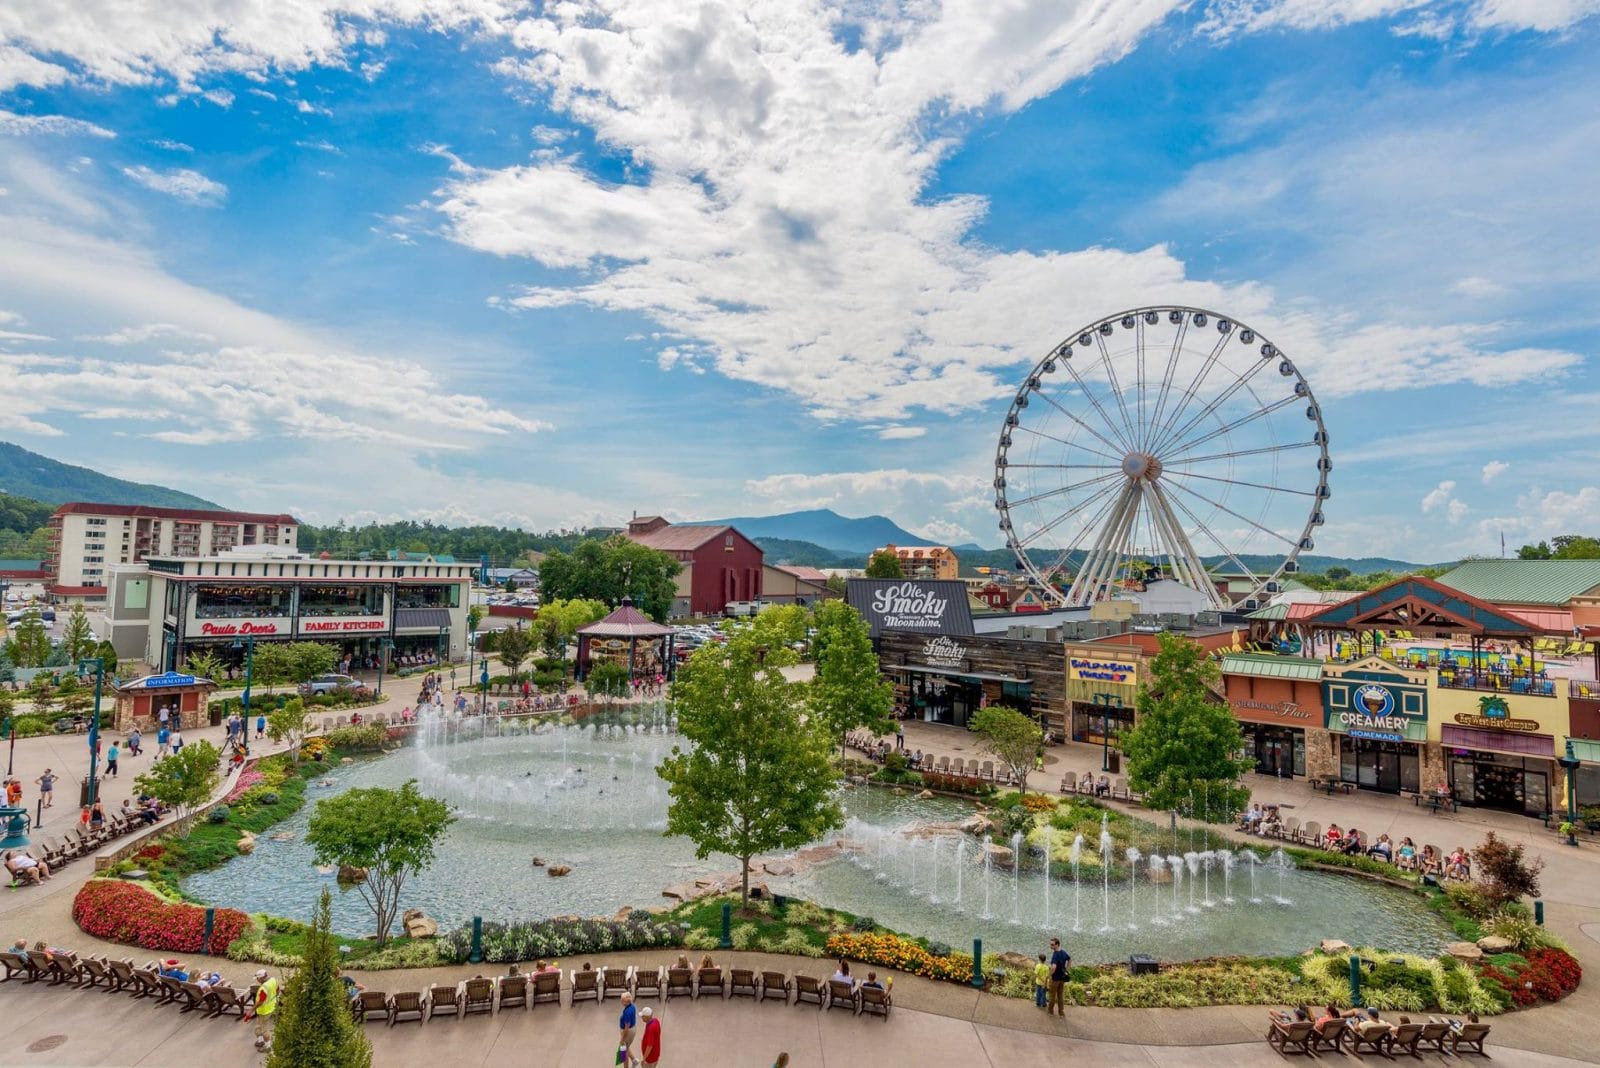 The Island In Pigeon Forge TN Family Entertainment Center